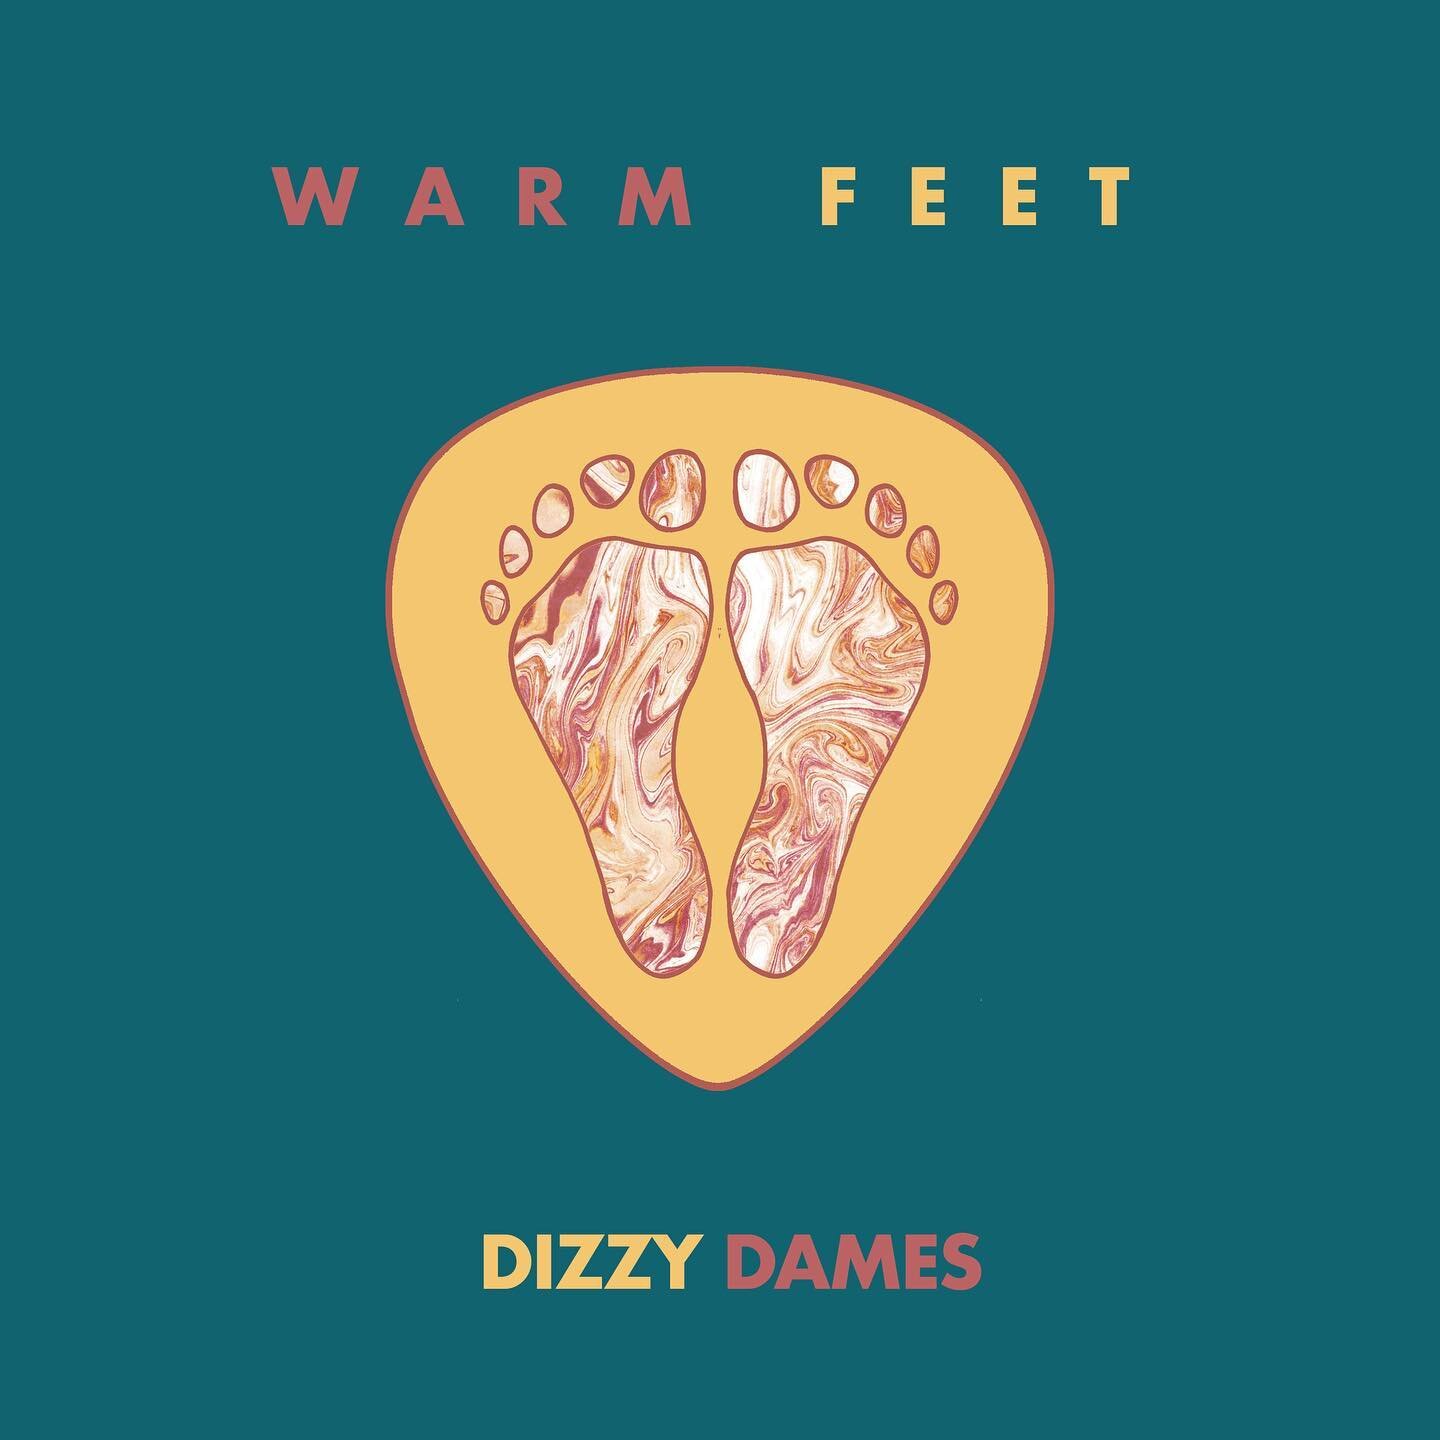 WARM FEET IS OUT NOW ON ALL STREAMING PLATFORMS! I hope you feel the love from this song. Excited to have this one out there. 
.
.
Like, heart, share and sing along to this new jam. Link in bio!